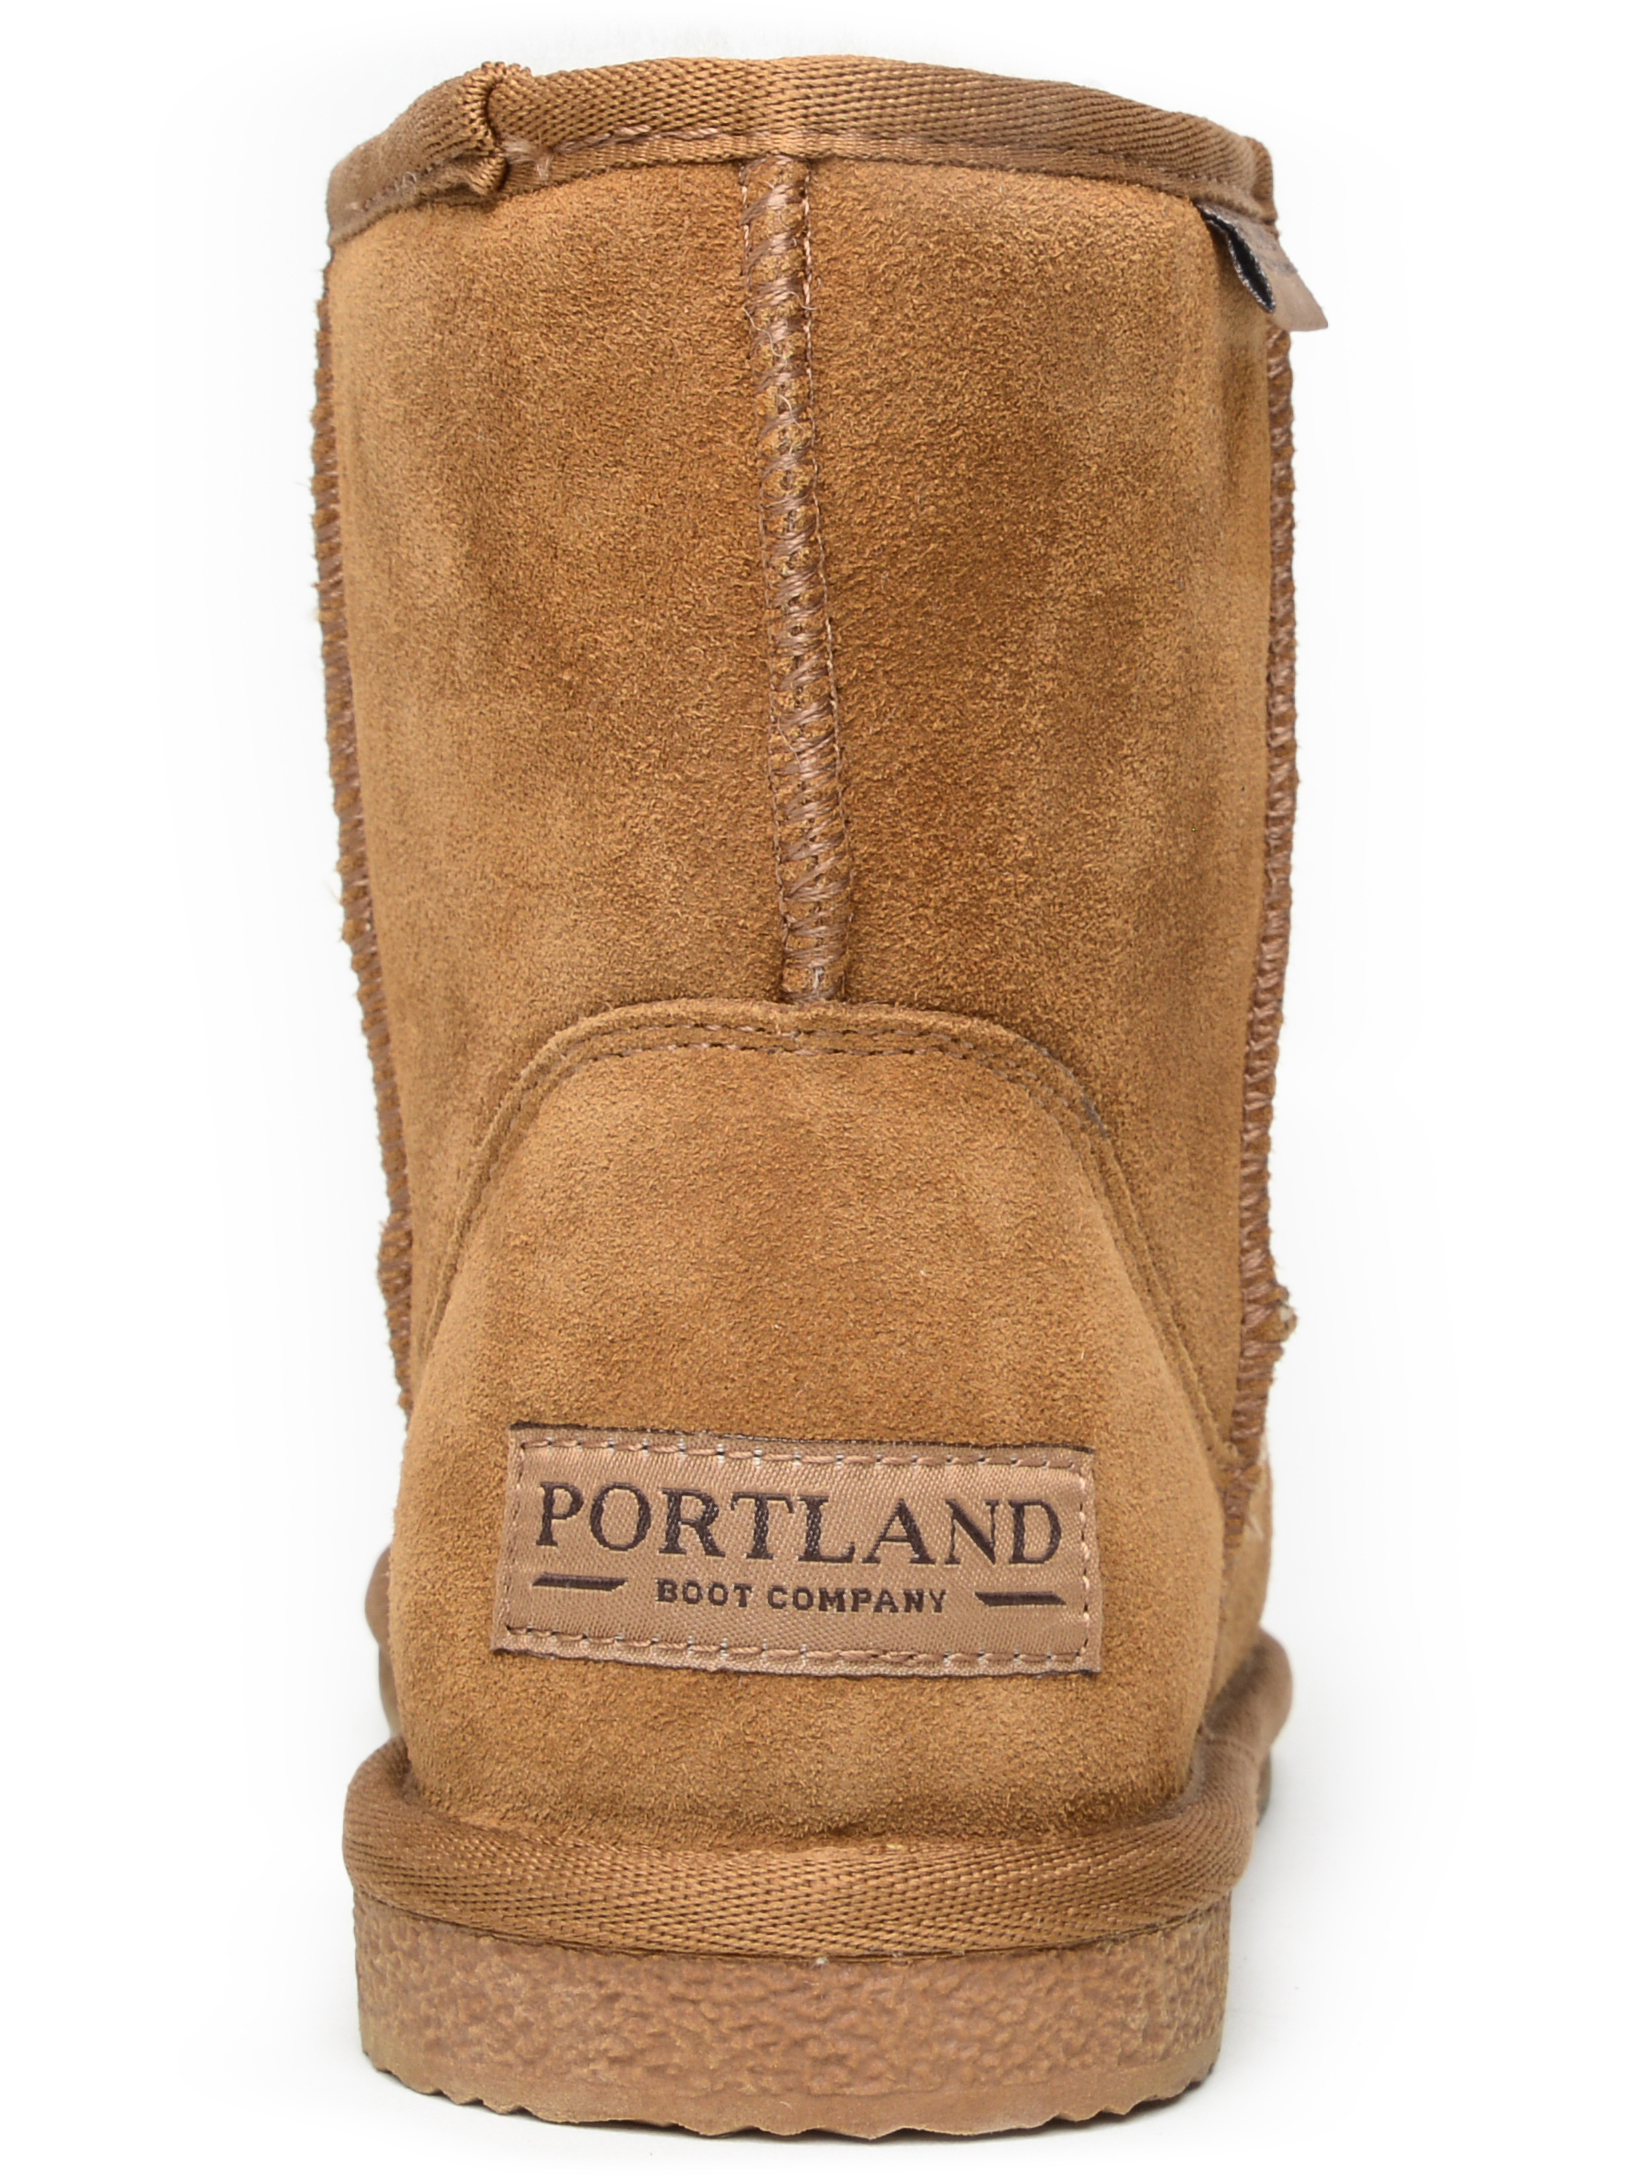 Portland Boot Company Women's Short Cozy Suede Boot - image 5 of 5